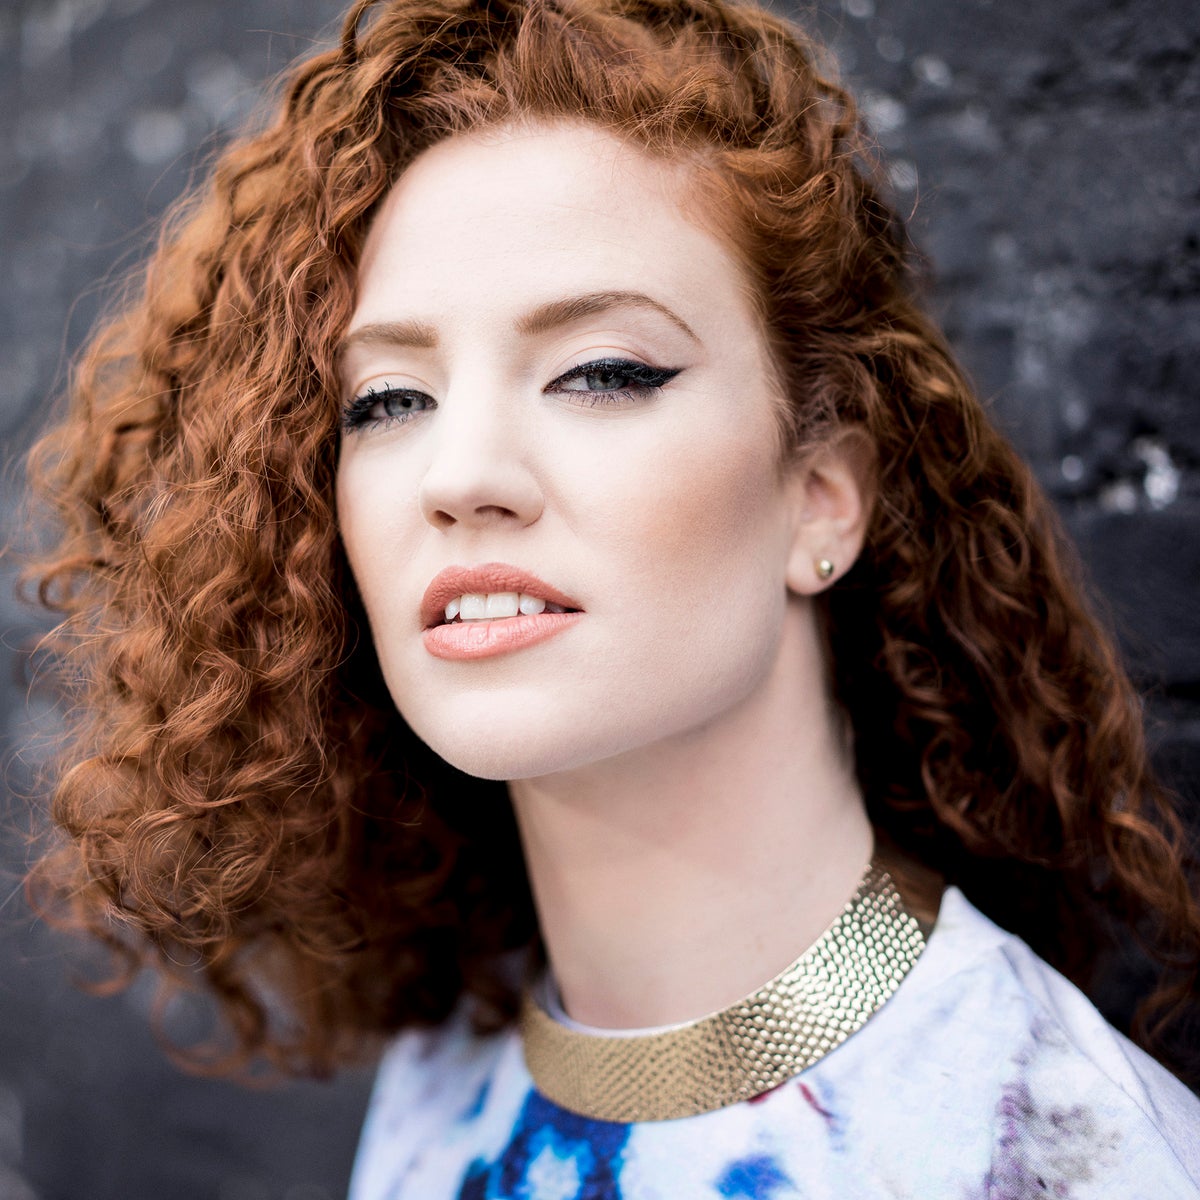 christine emil recommends redhead female singer pic